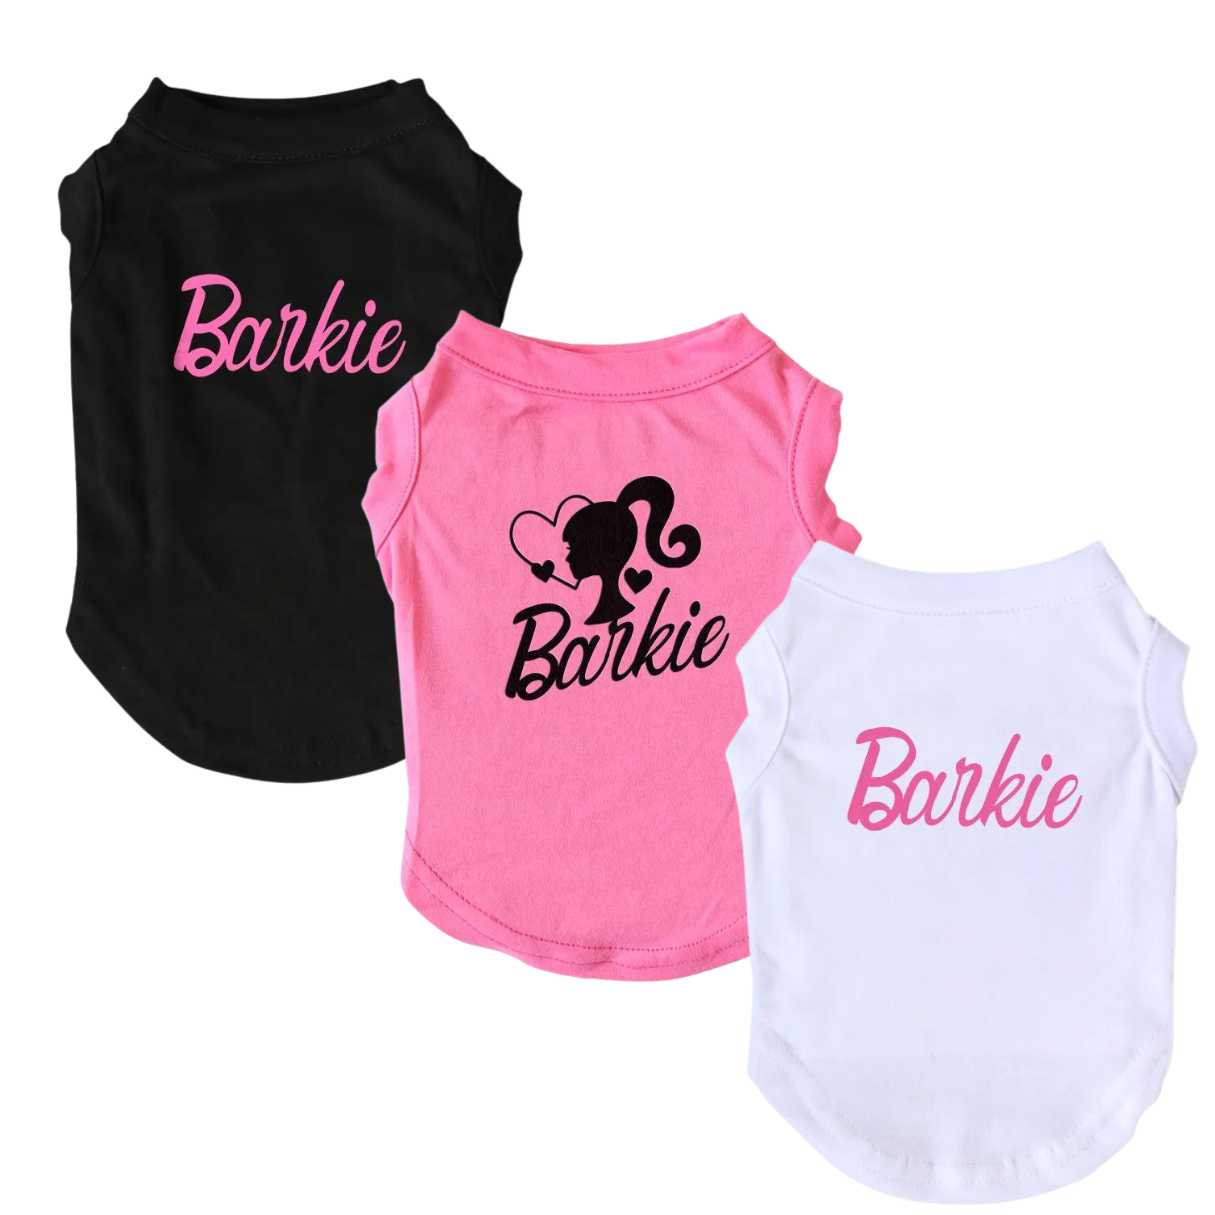 Barkie Dog Tshirts Black Pink and white. It Comes in 2 different styles. 